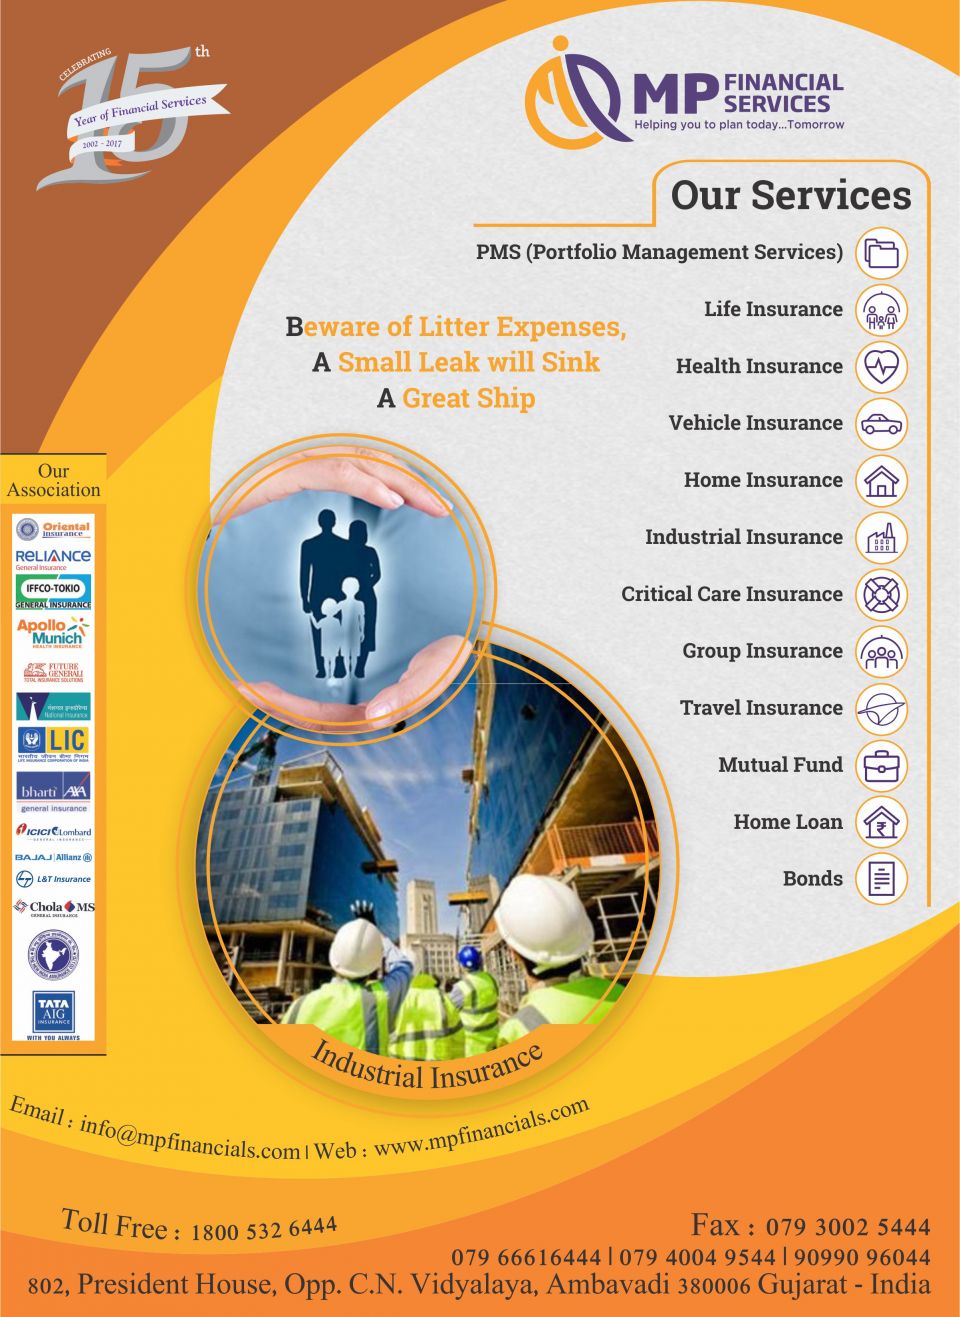 MP Financial Services